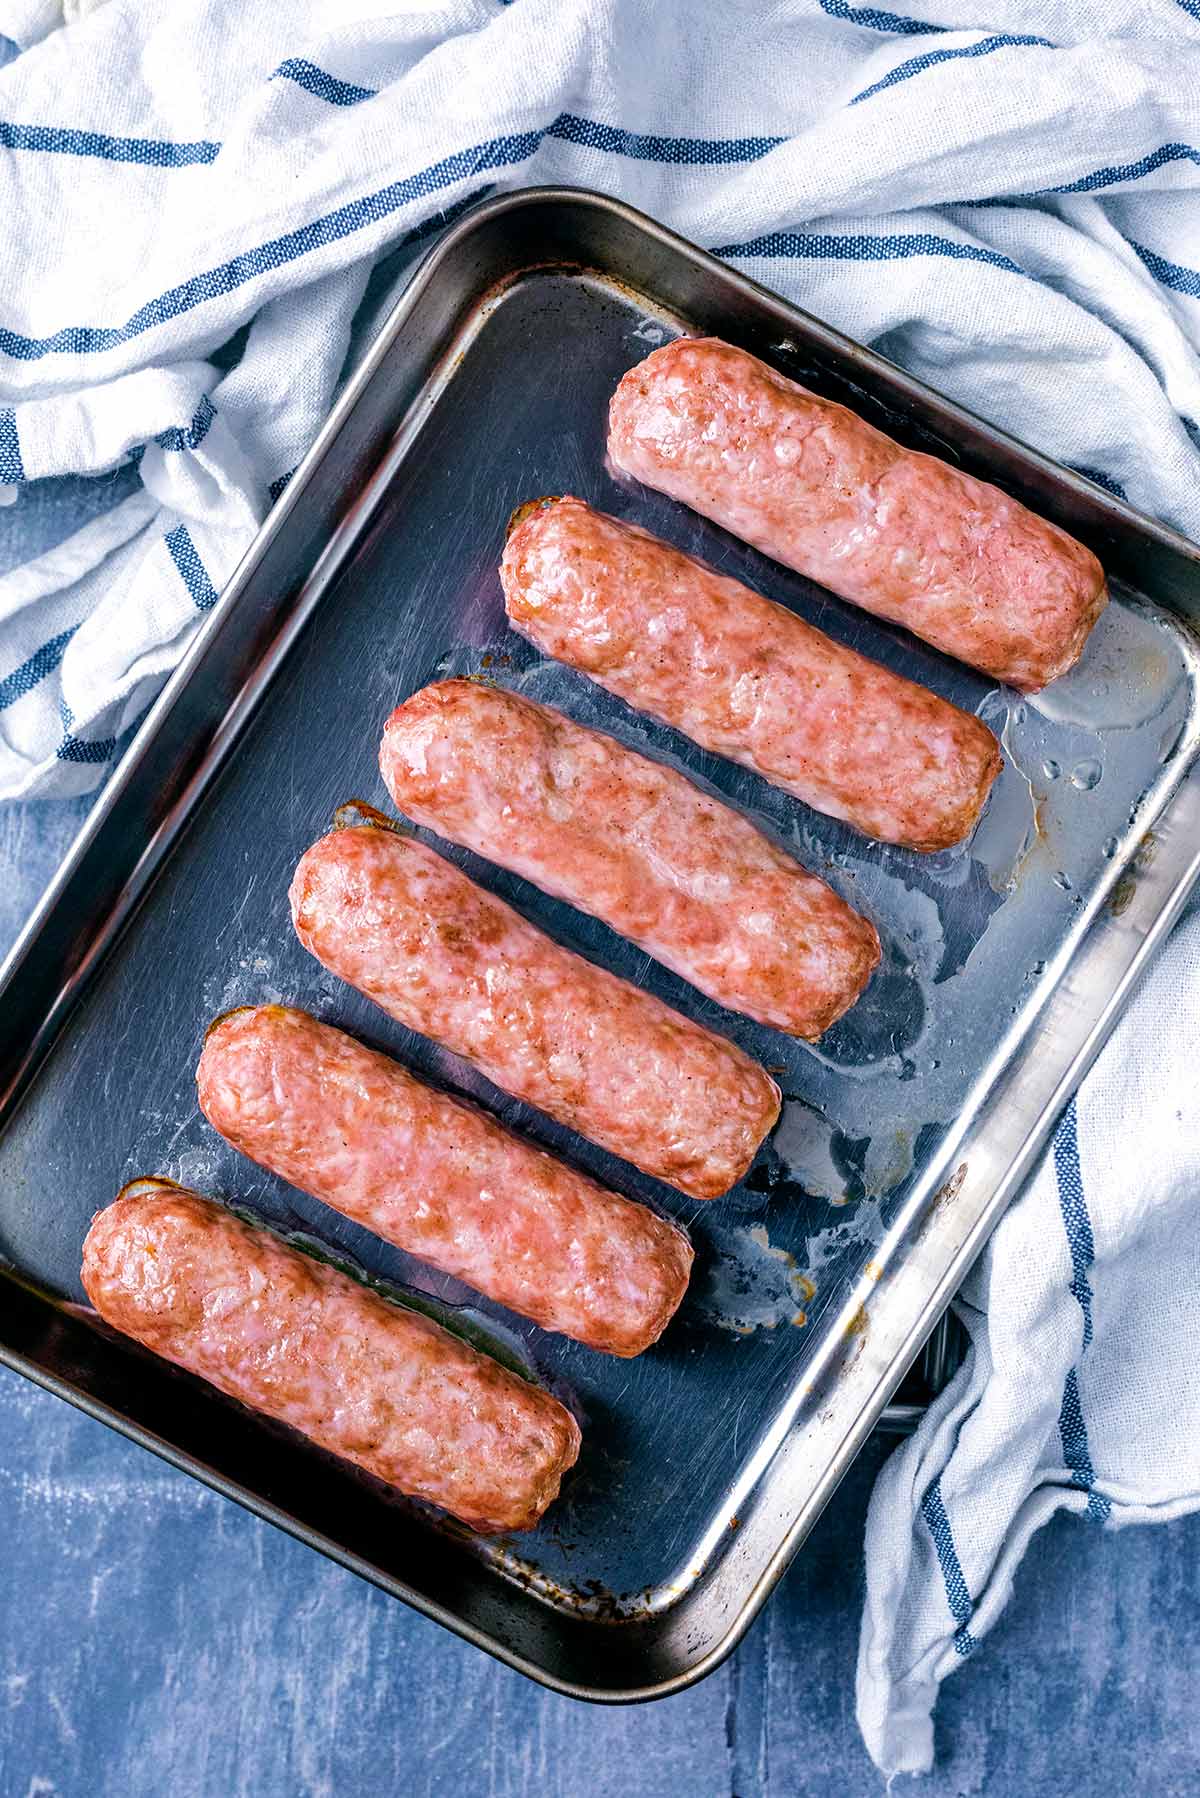 Six cooked sausages on a baking tray.